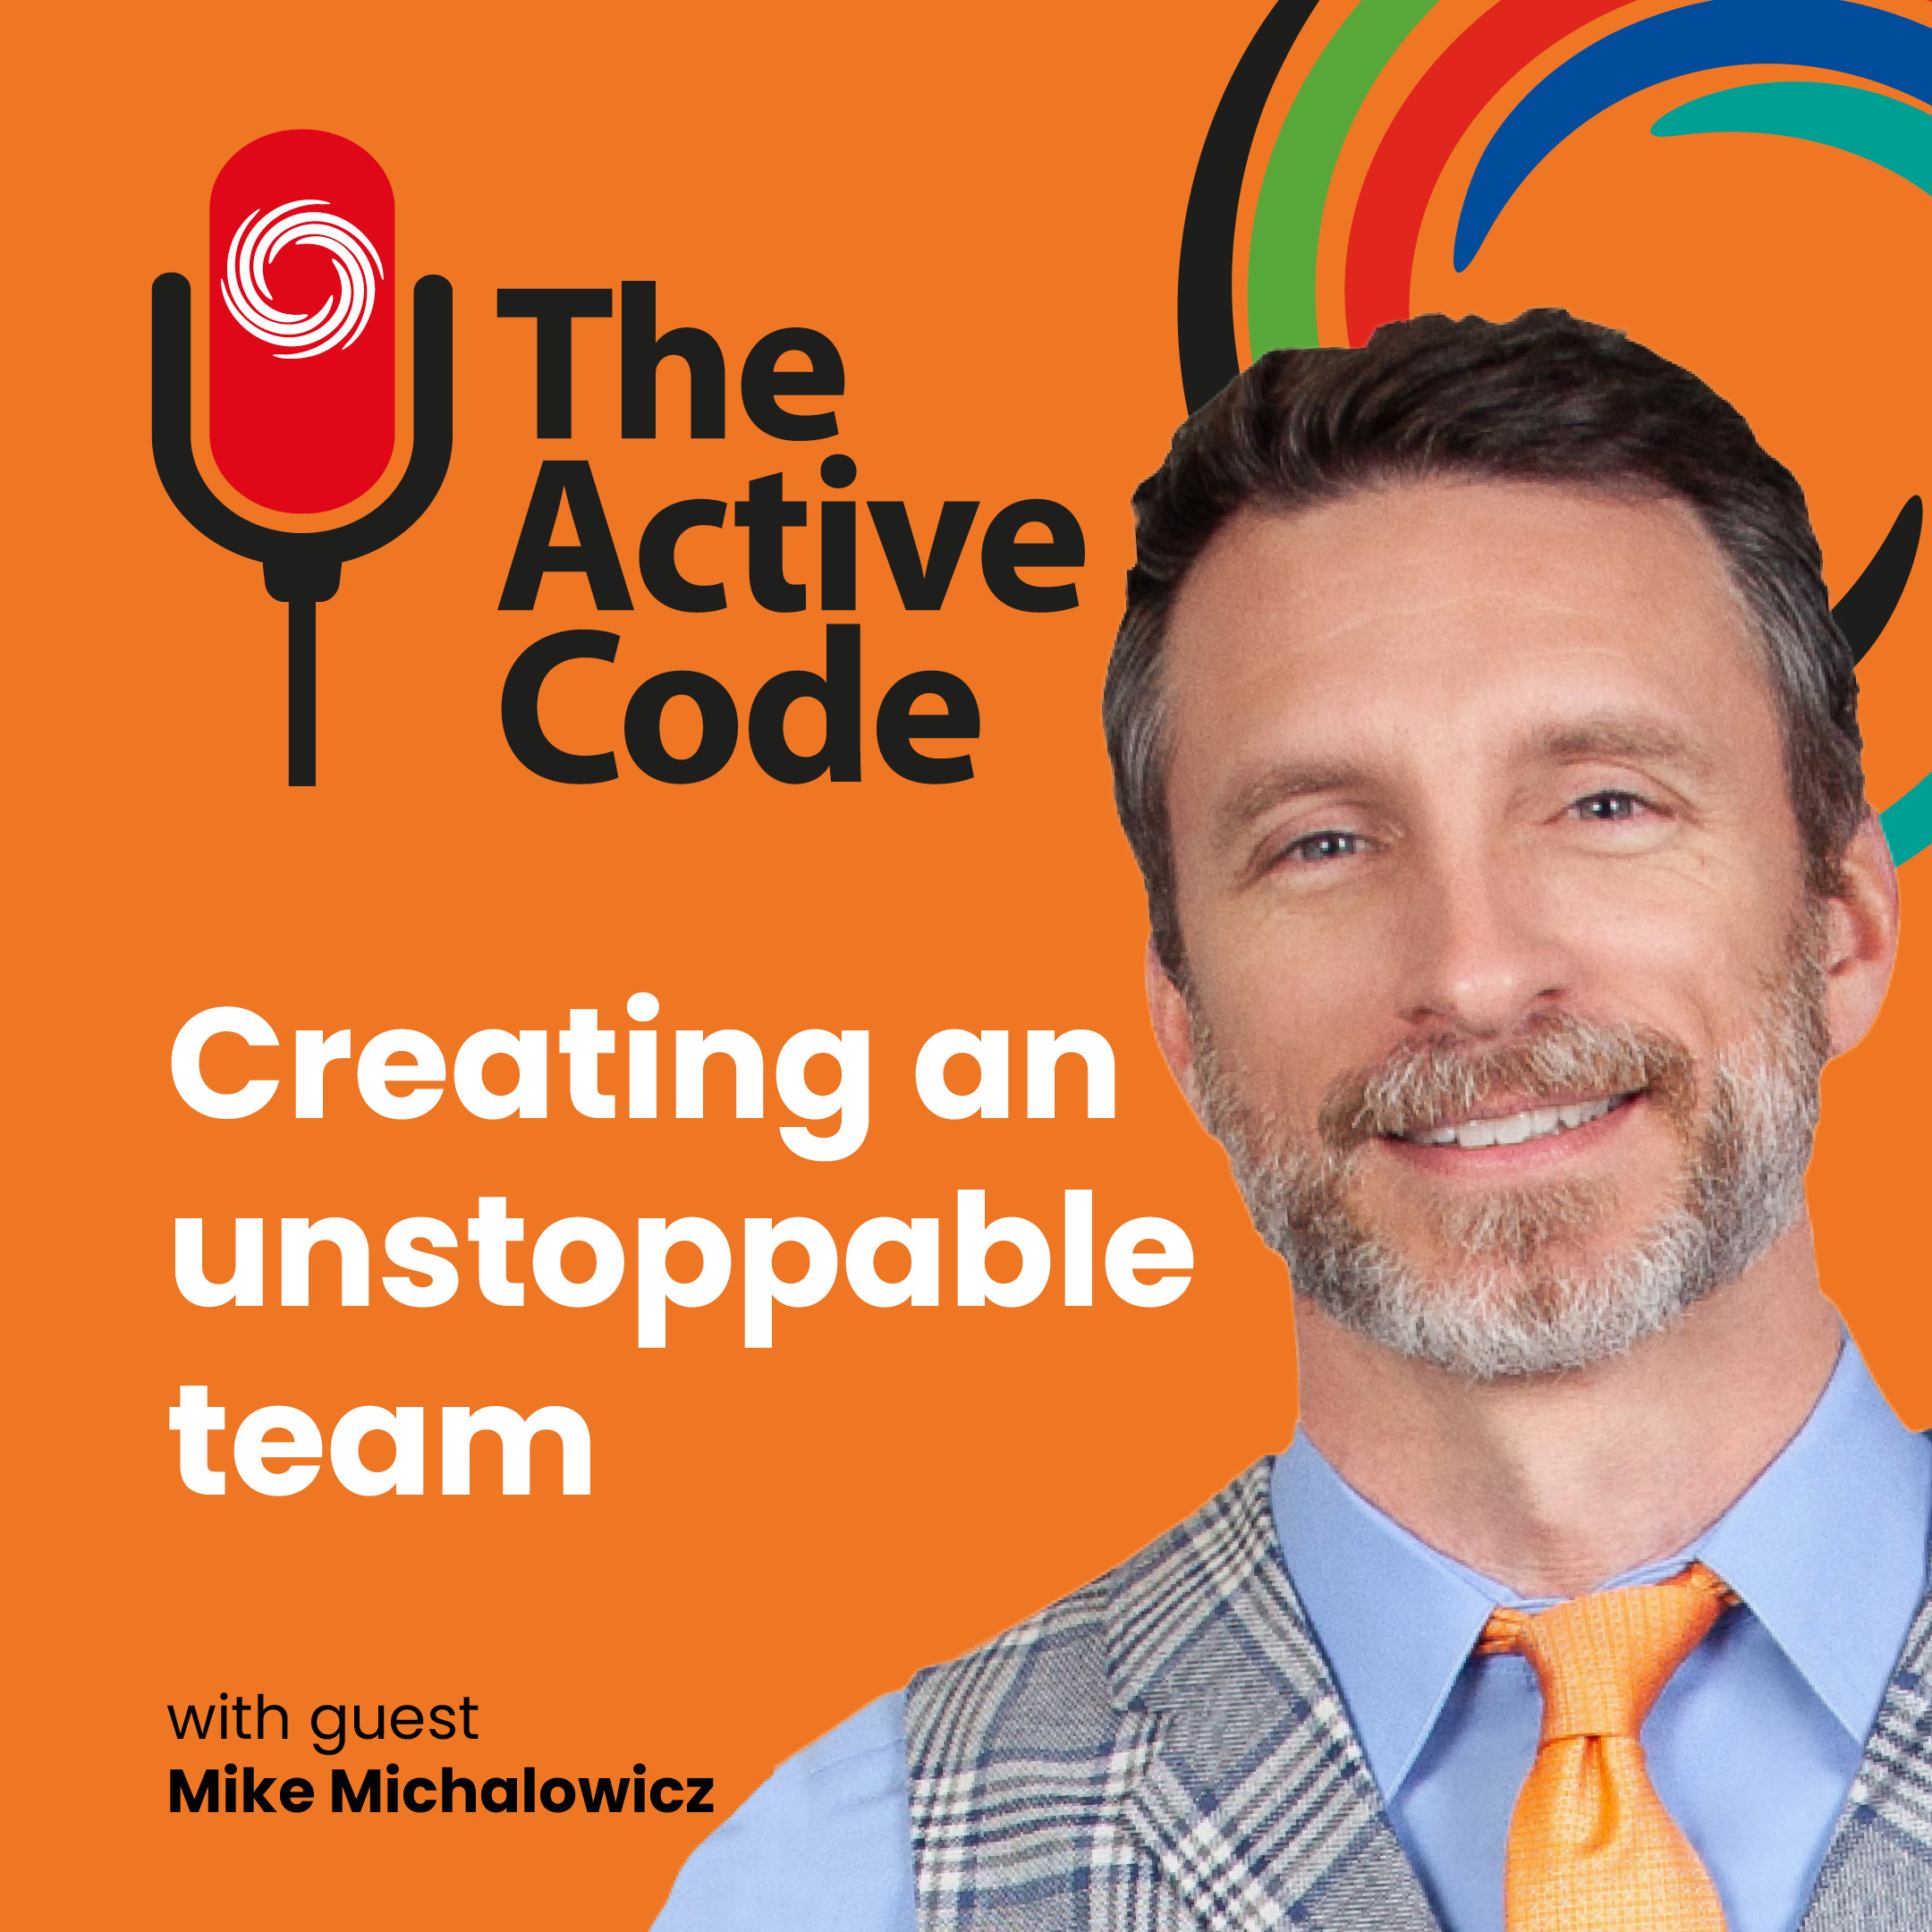 The Active Code – Creating an unstoppable team